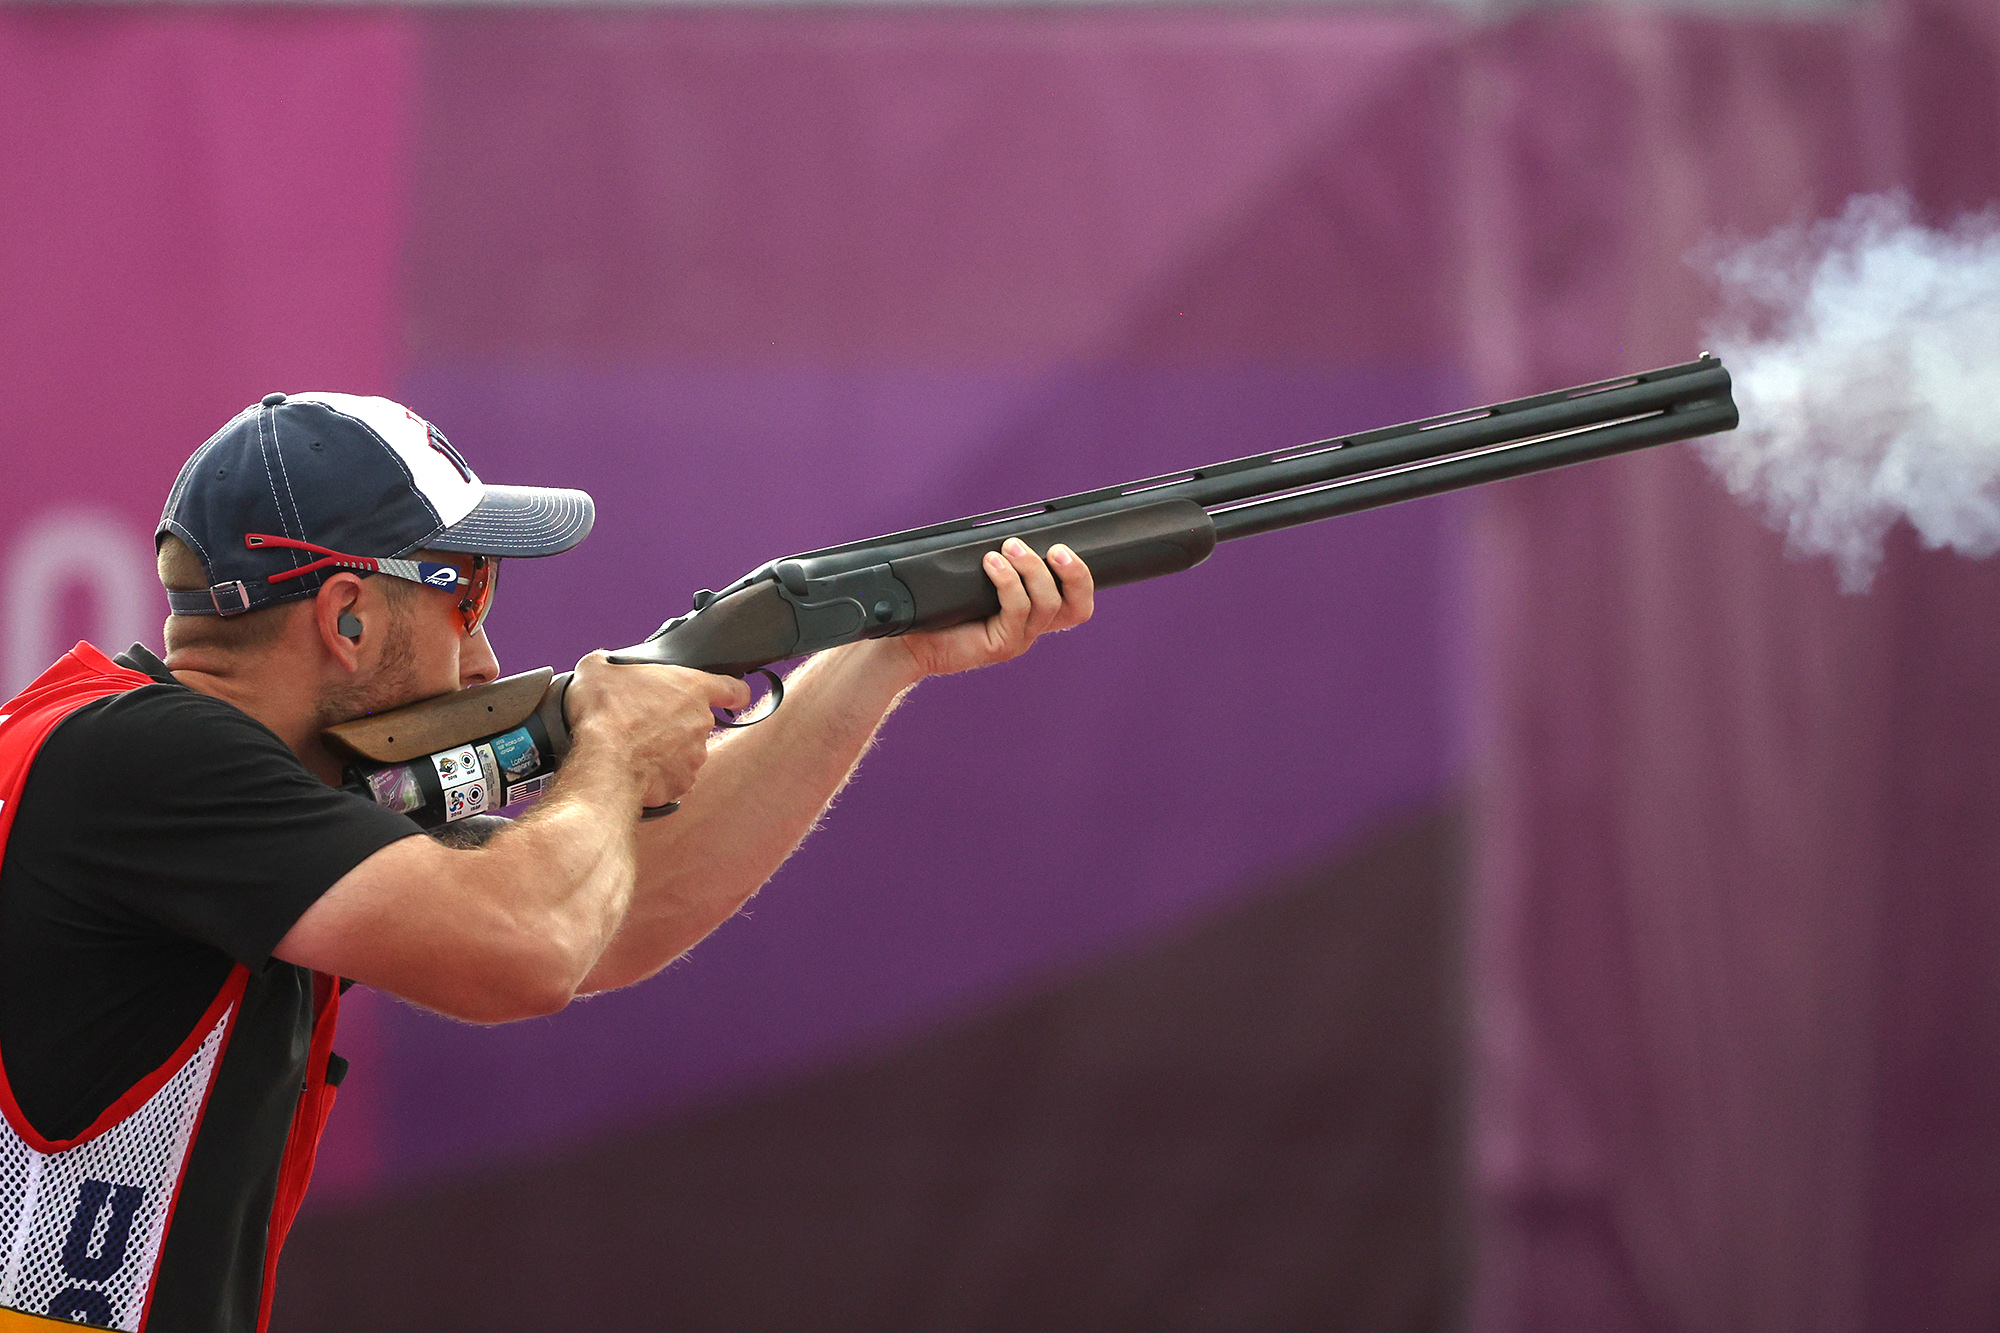 A Complete Guide to the Shooting Events at the Paris Olympics